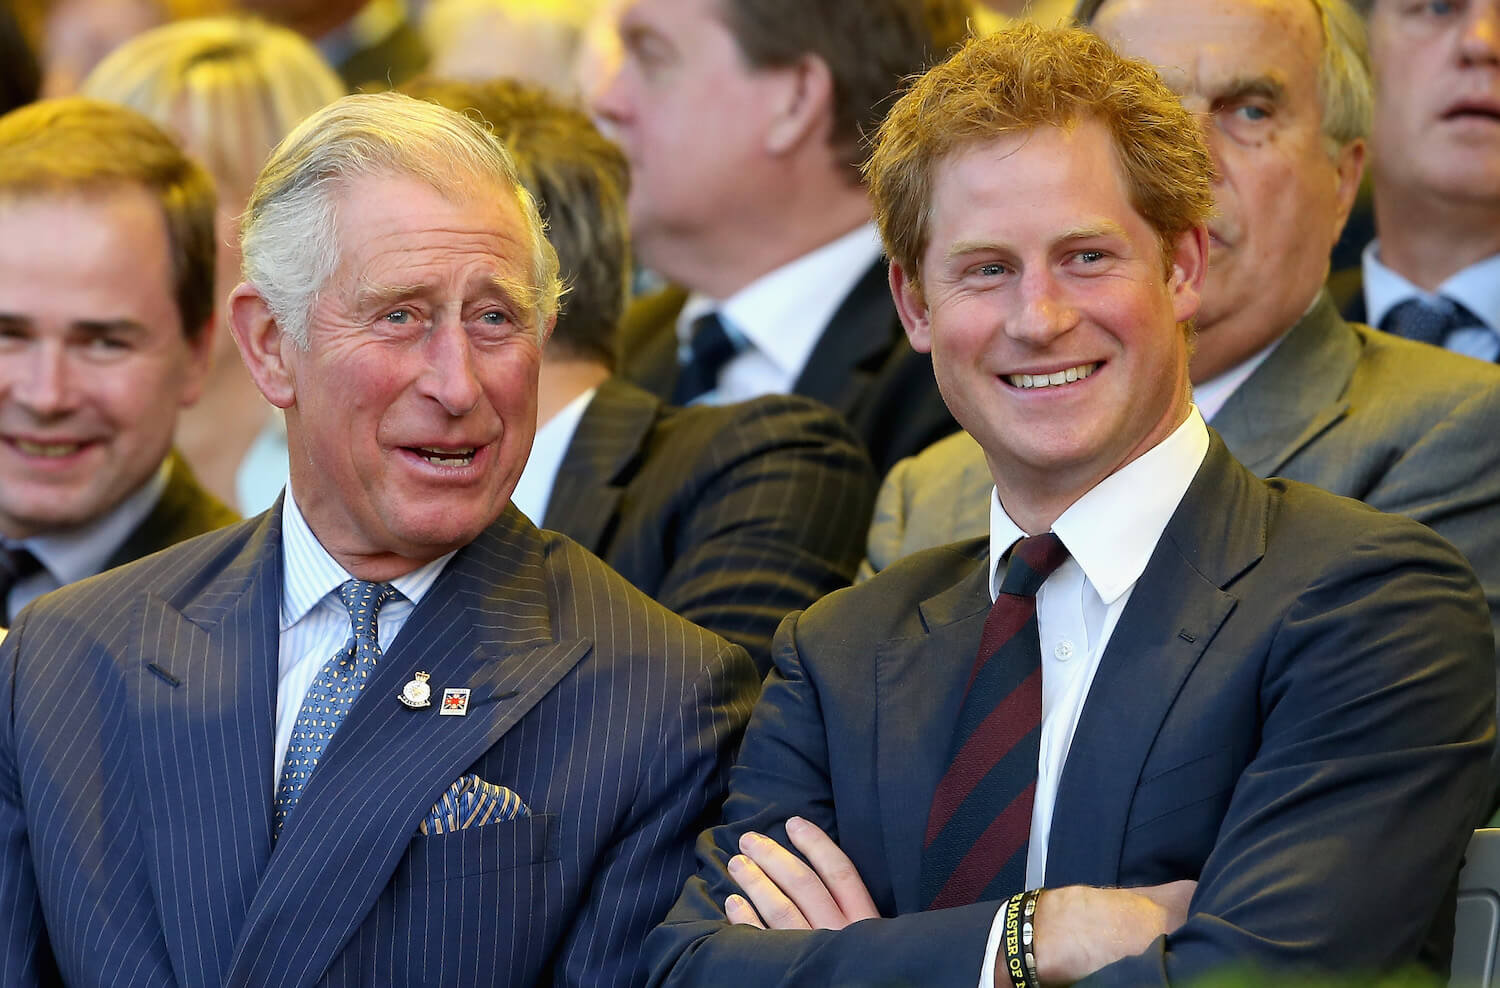 King Charles and Prince Harry sitting next to each other and smiling